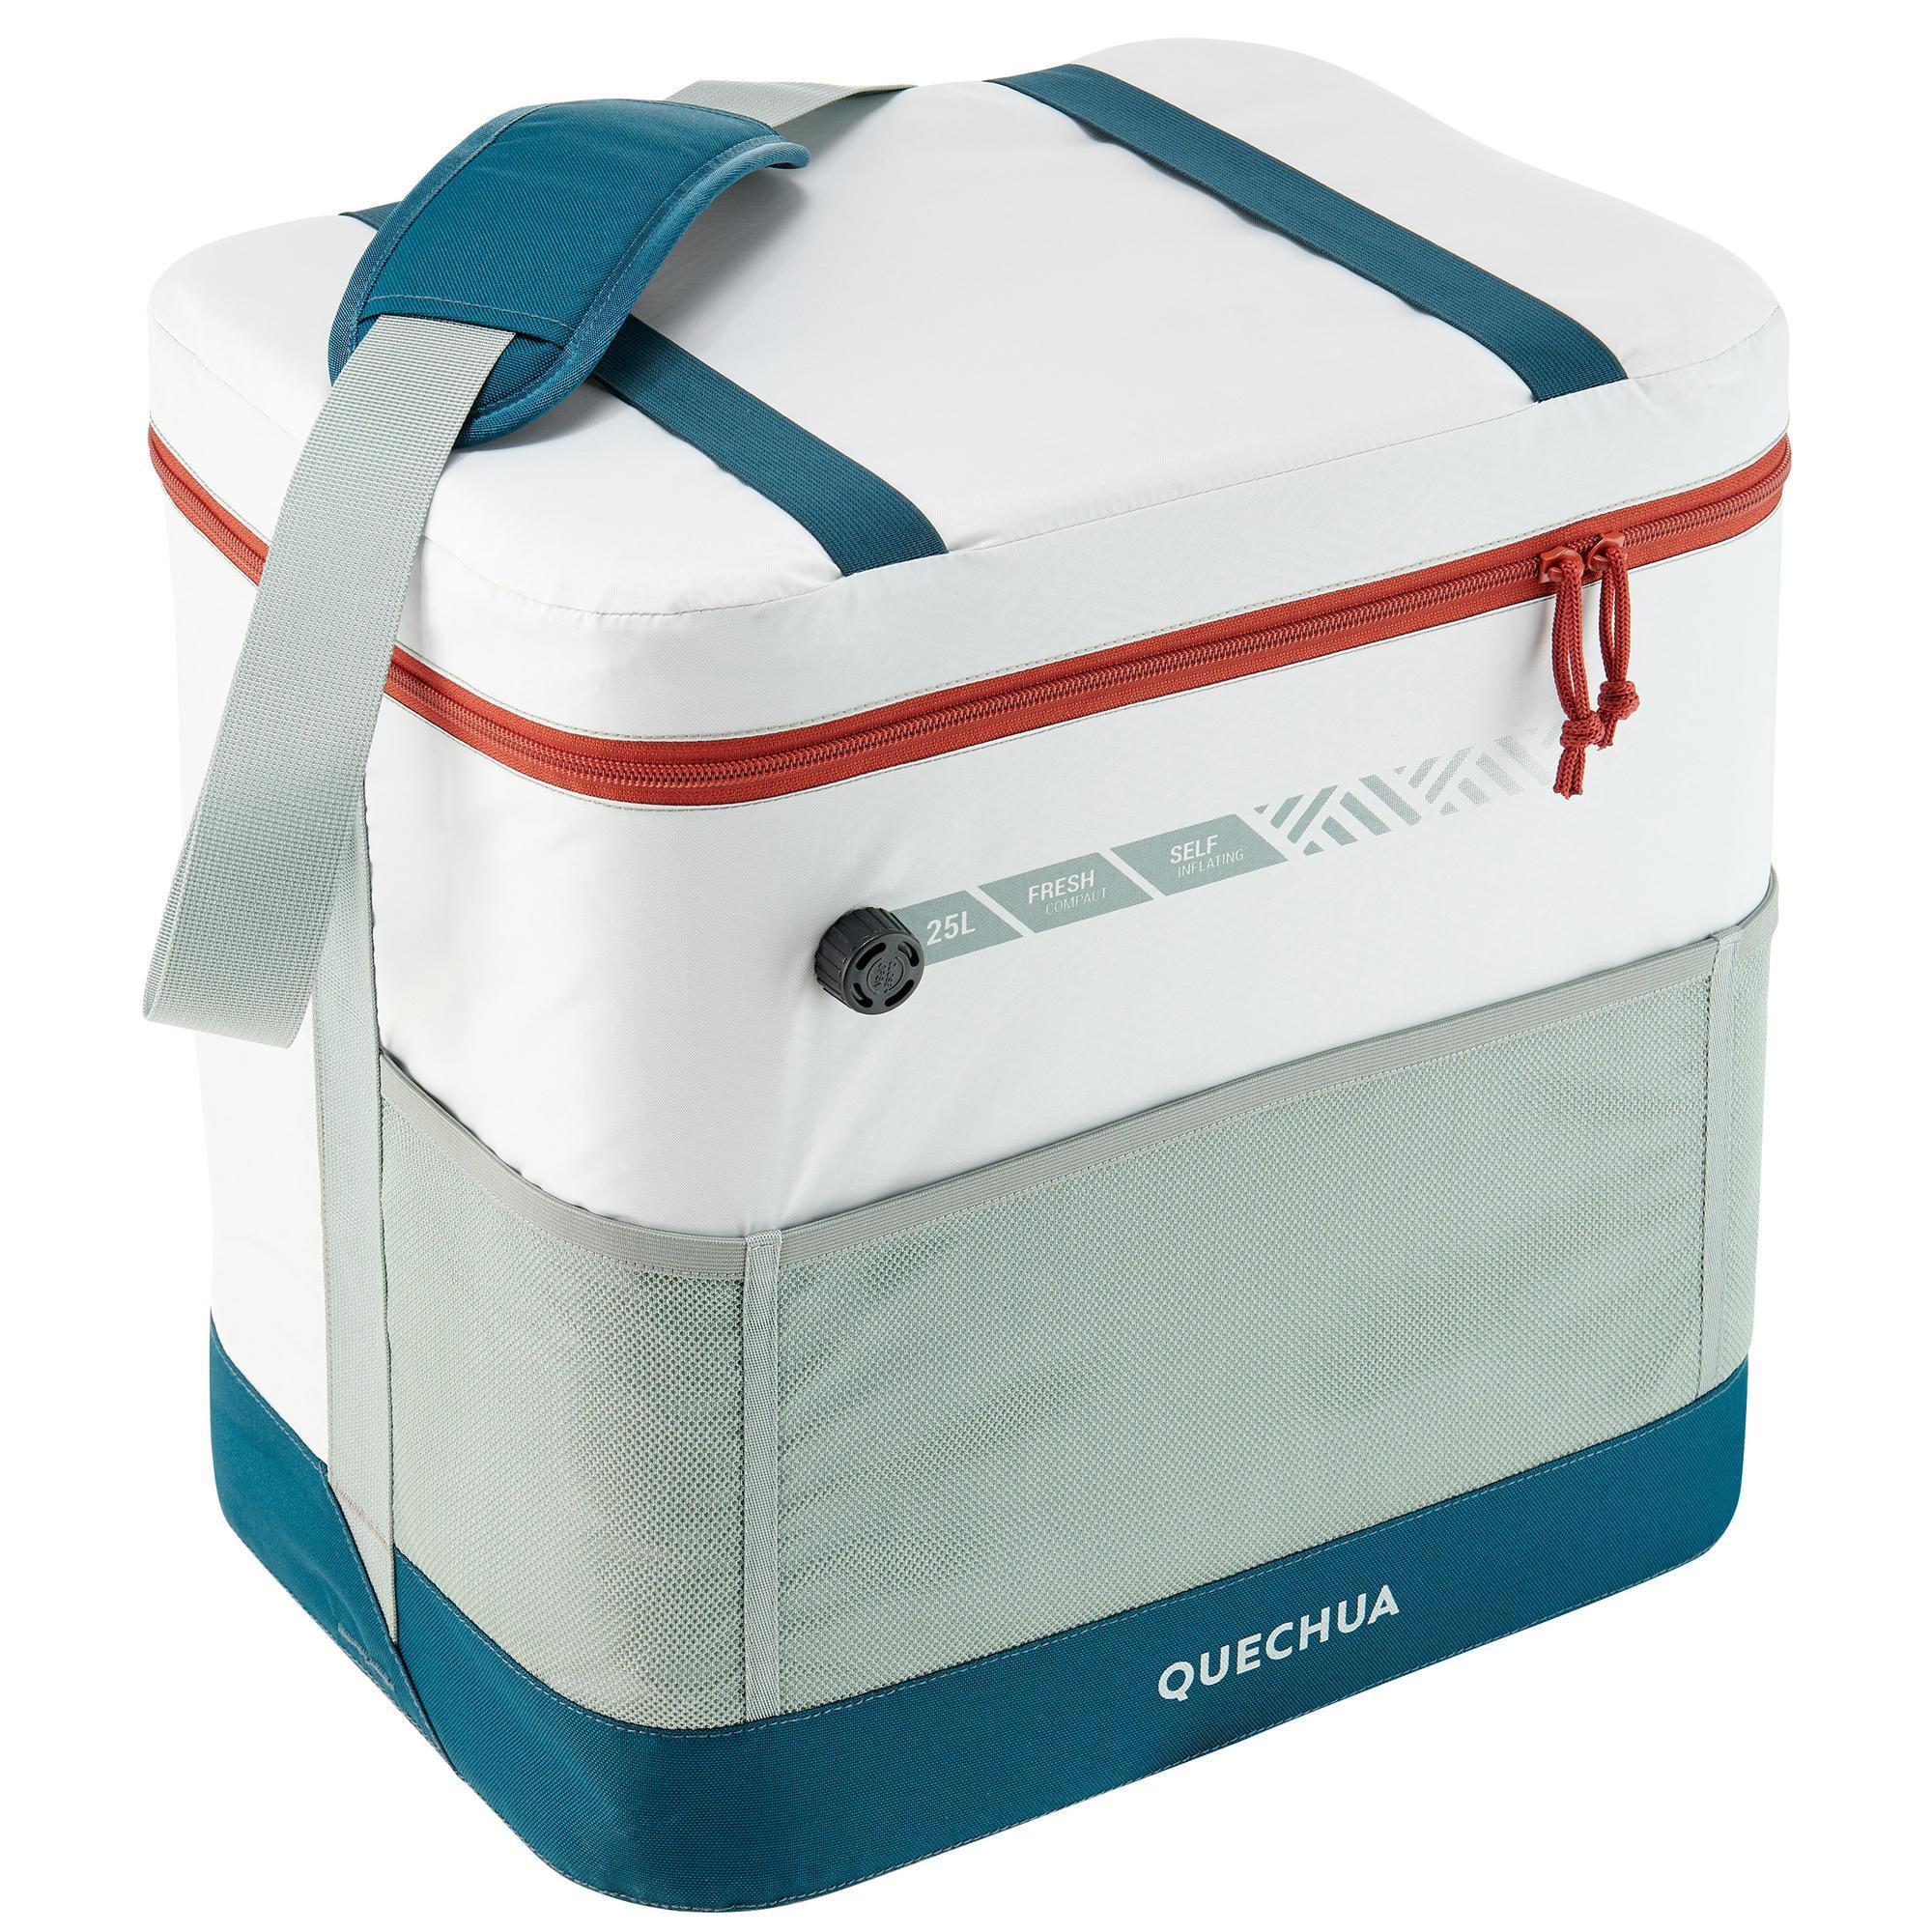 Camping Flexible Cooler - 25 L - Preserves Cold for 15 Hours 3/9